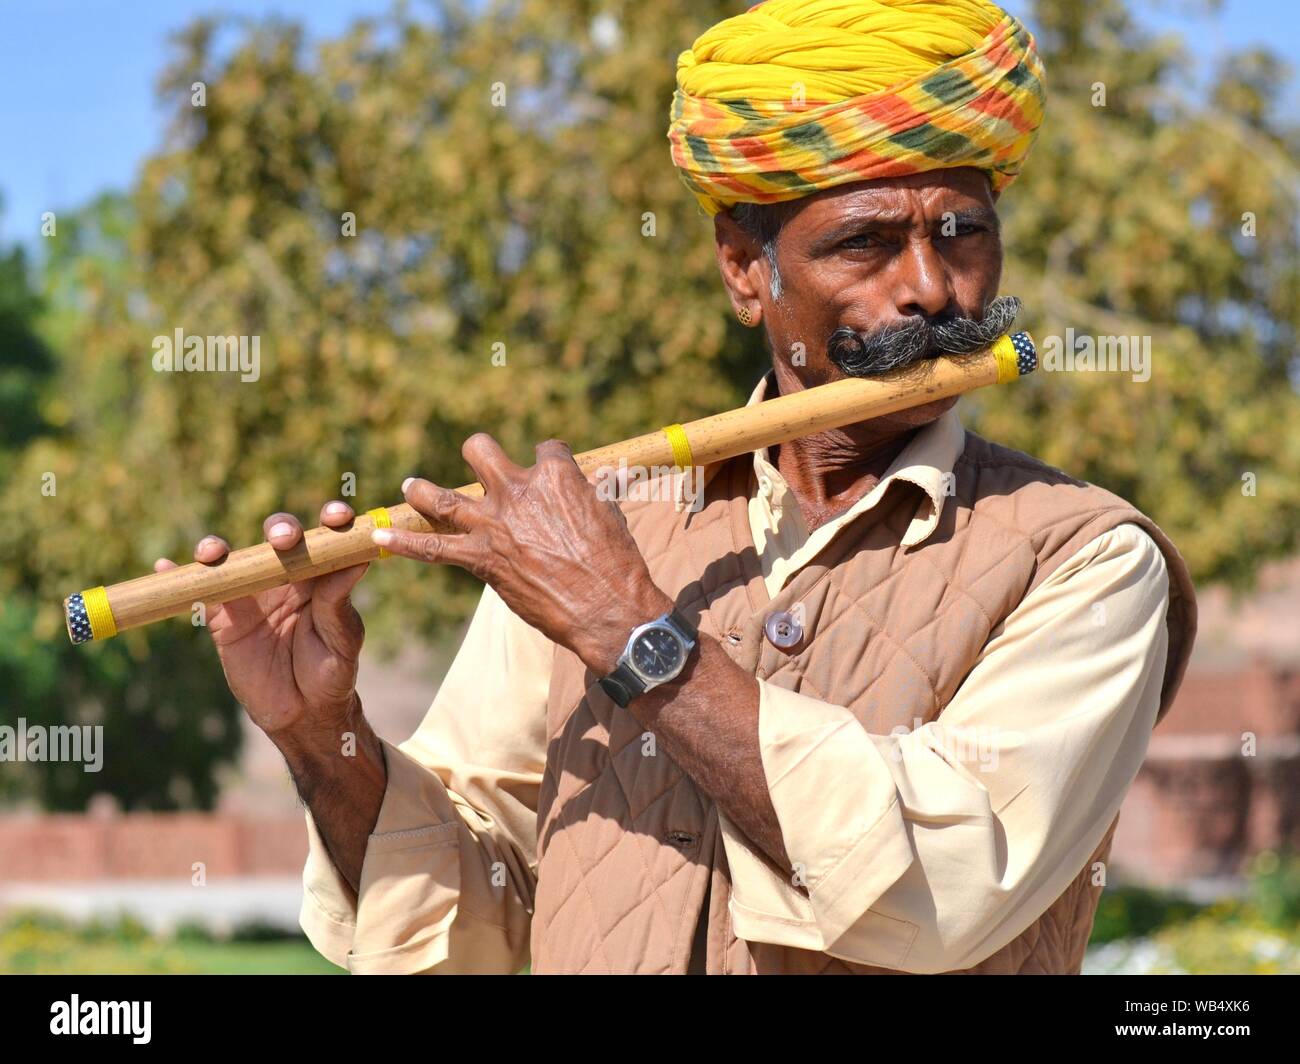 Indian bansuri player (traditional transverse flute) with yellow Rajasthani turban plays outdoors on his instrument. Stock Photo